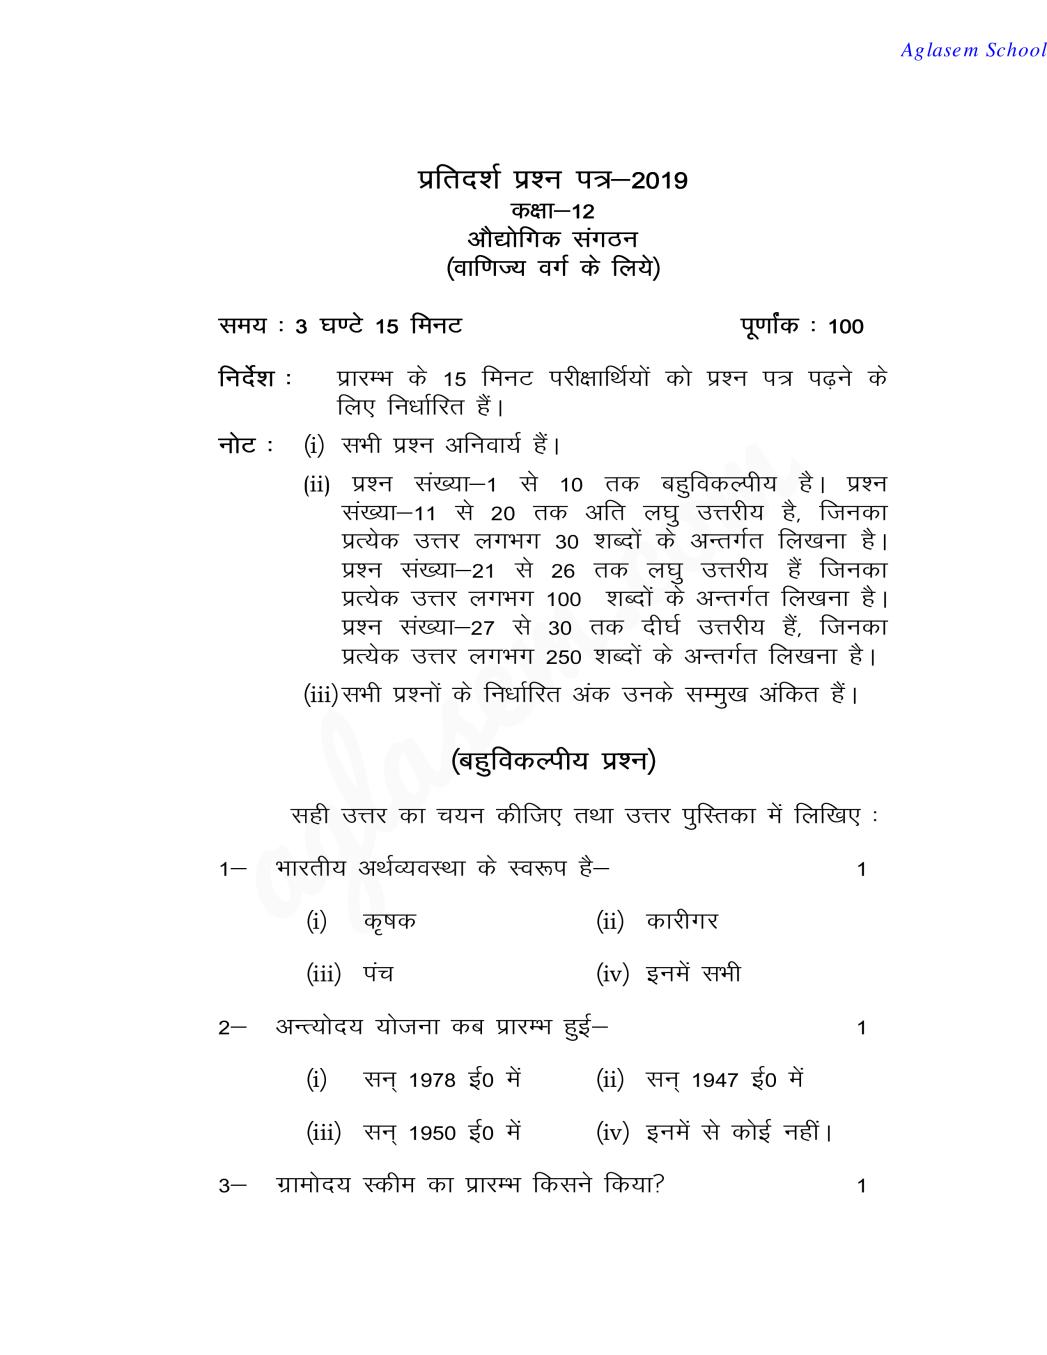 UP Board Class 12 Model Paper 2019 INDUSTRIAL ORGANIZATION - Page 1